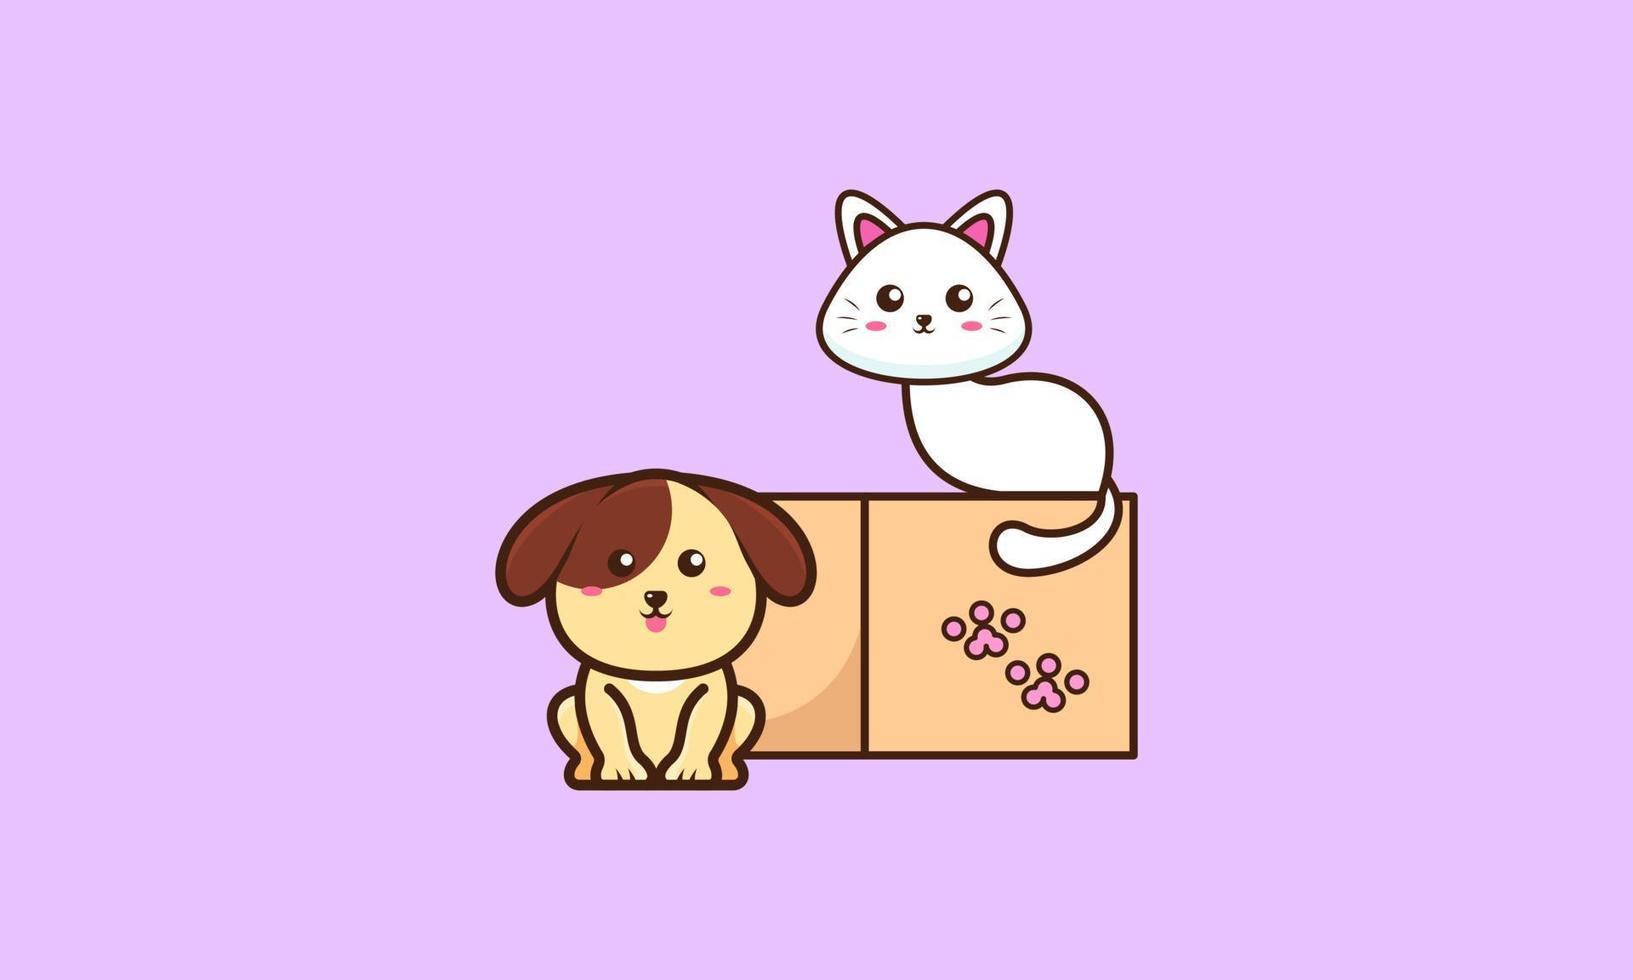 Cute cat and dog friend cartoon vector illustration. Animal friend icon concept